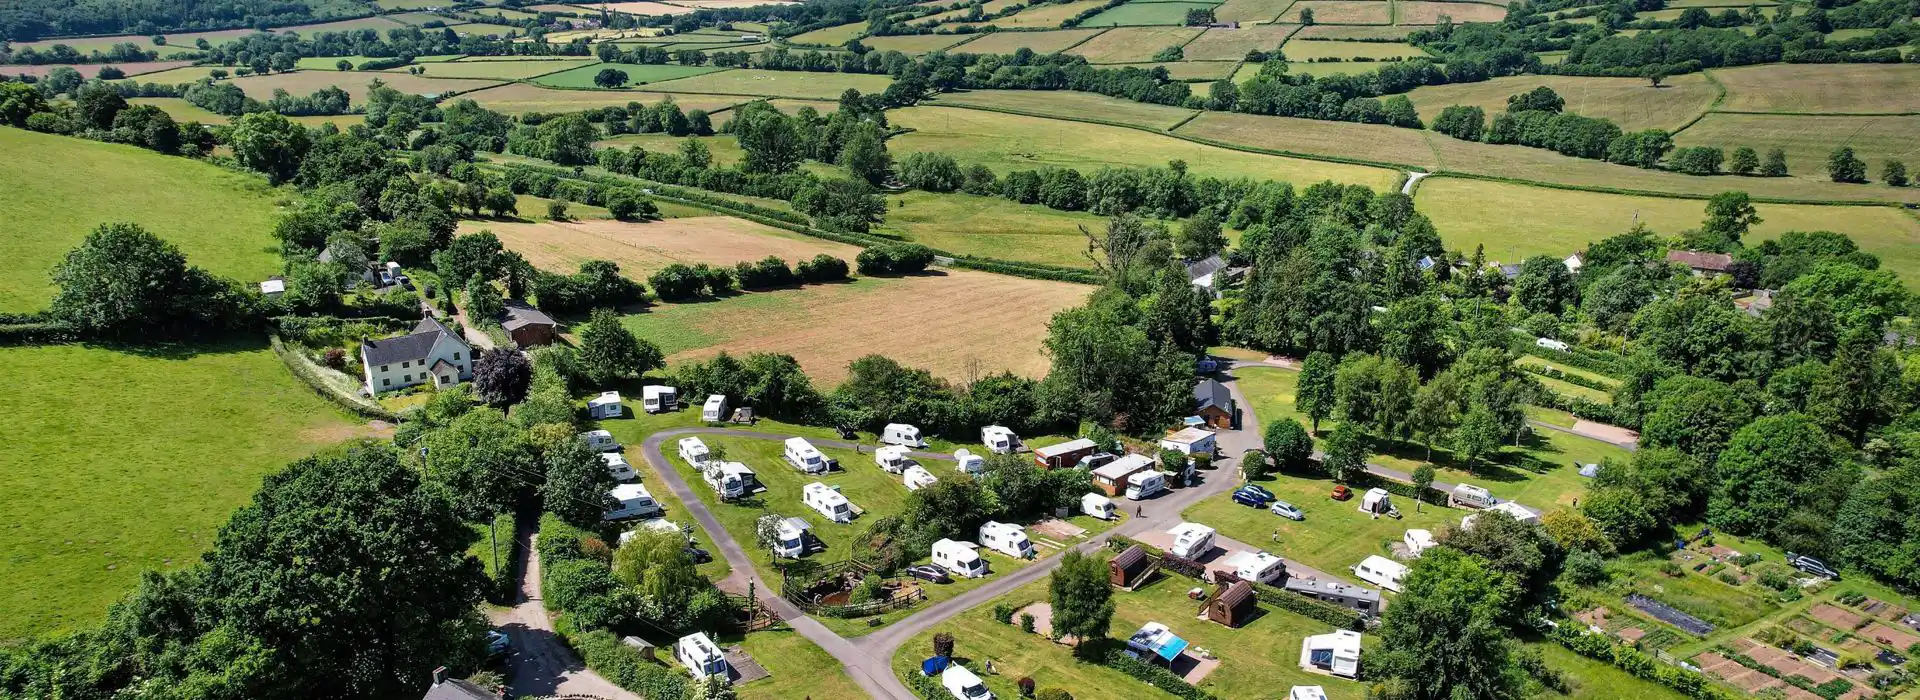 Motorhome parks in Powys